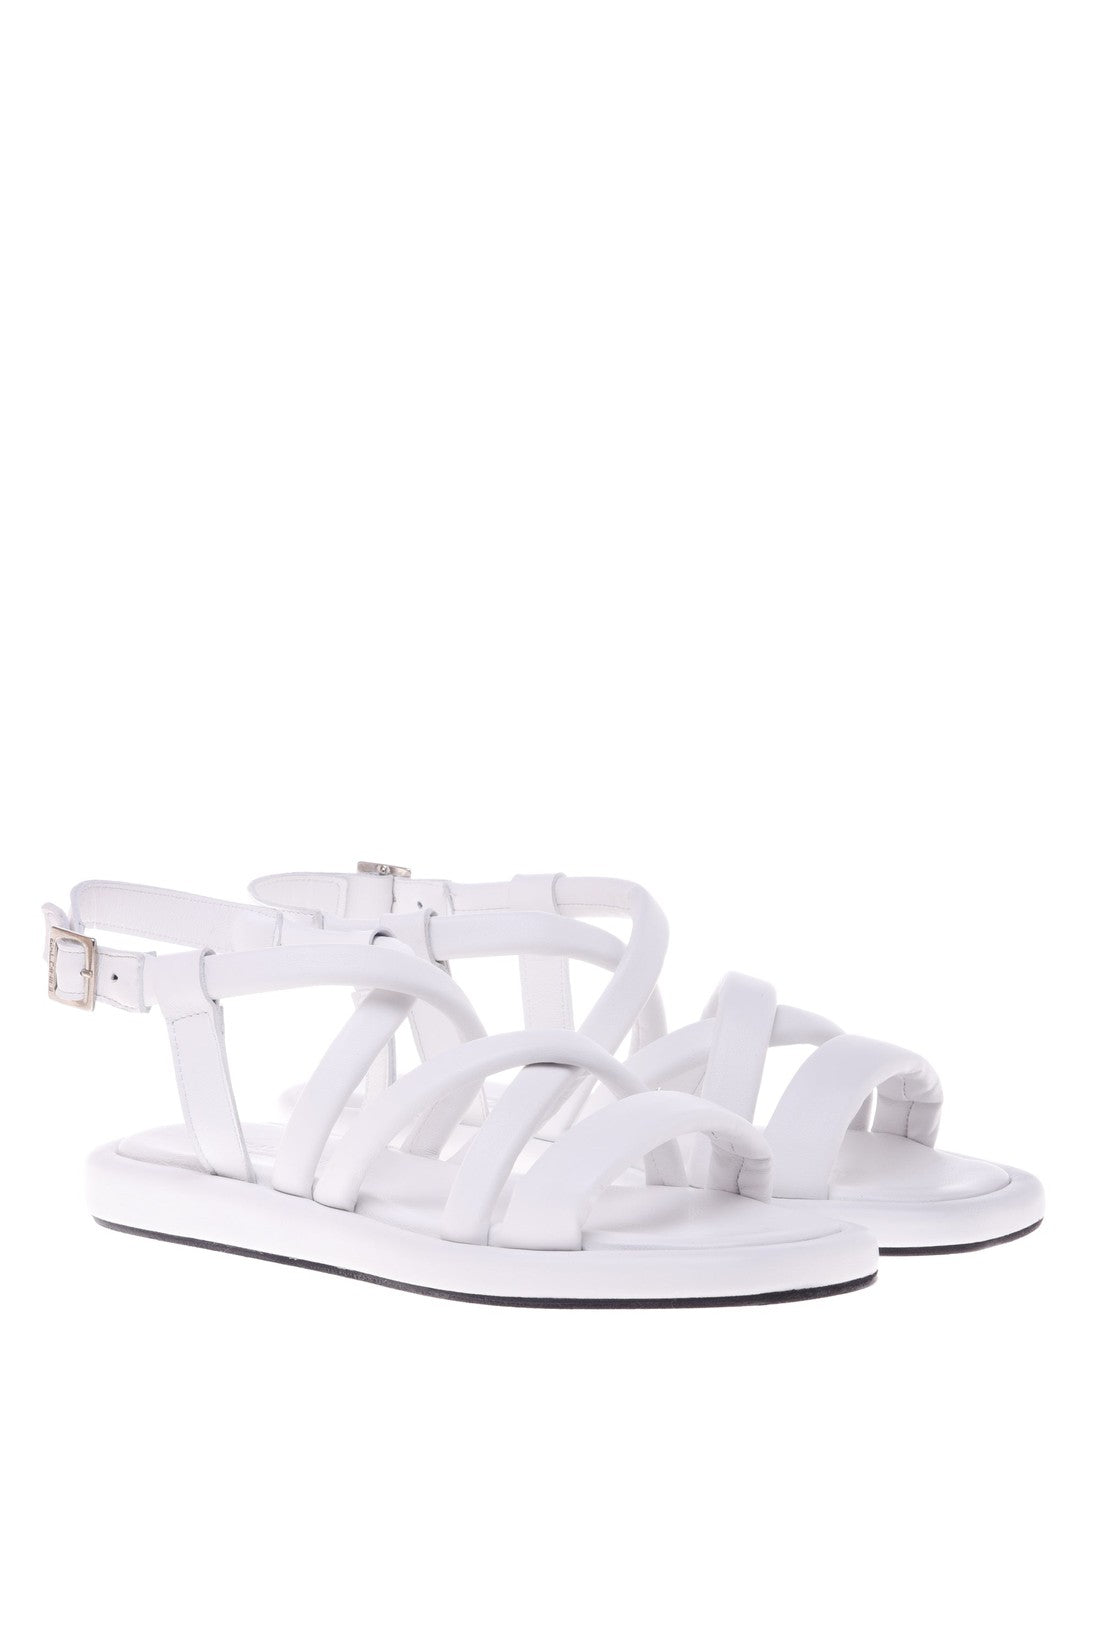 Sandal in white nappa leather